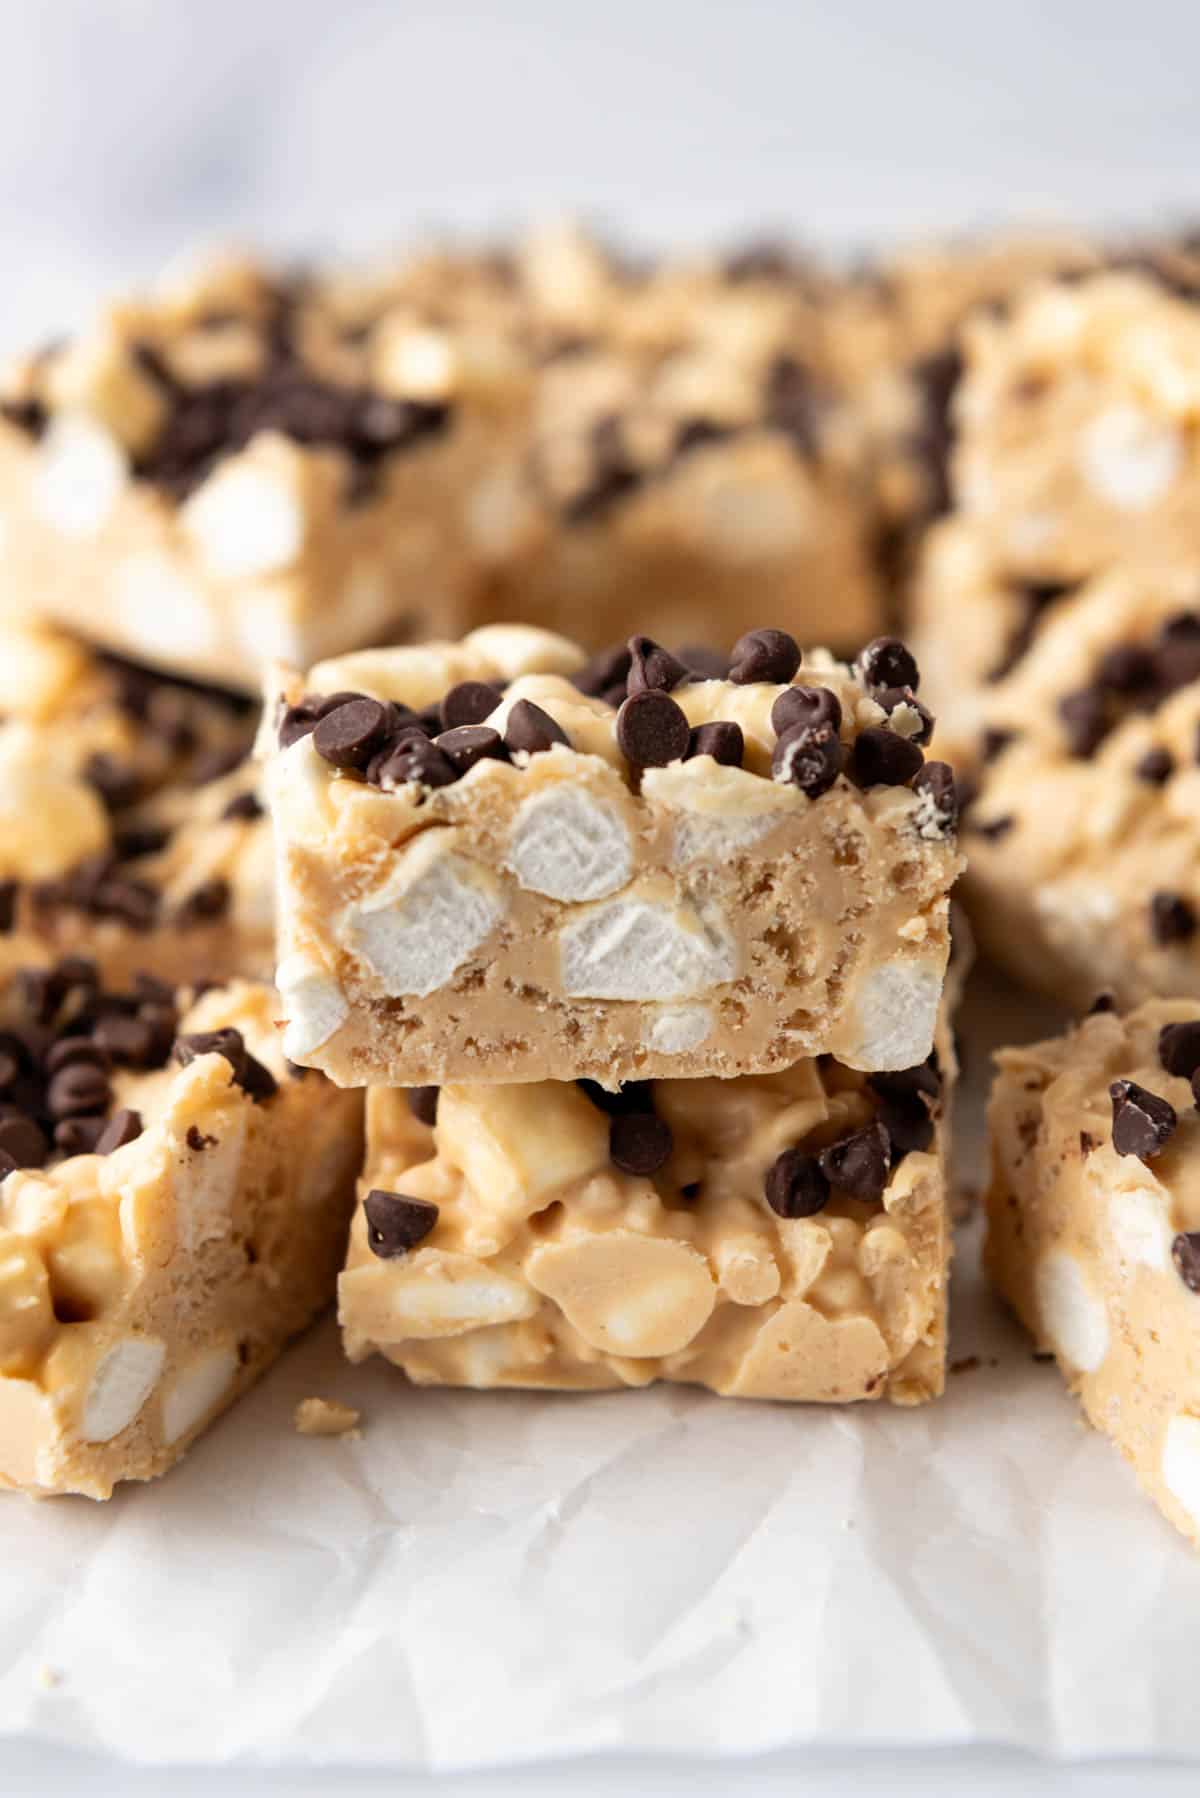 Homemade Rocky Mountain avalanche bars that have been sliced into squares and stacked.